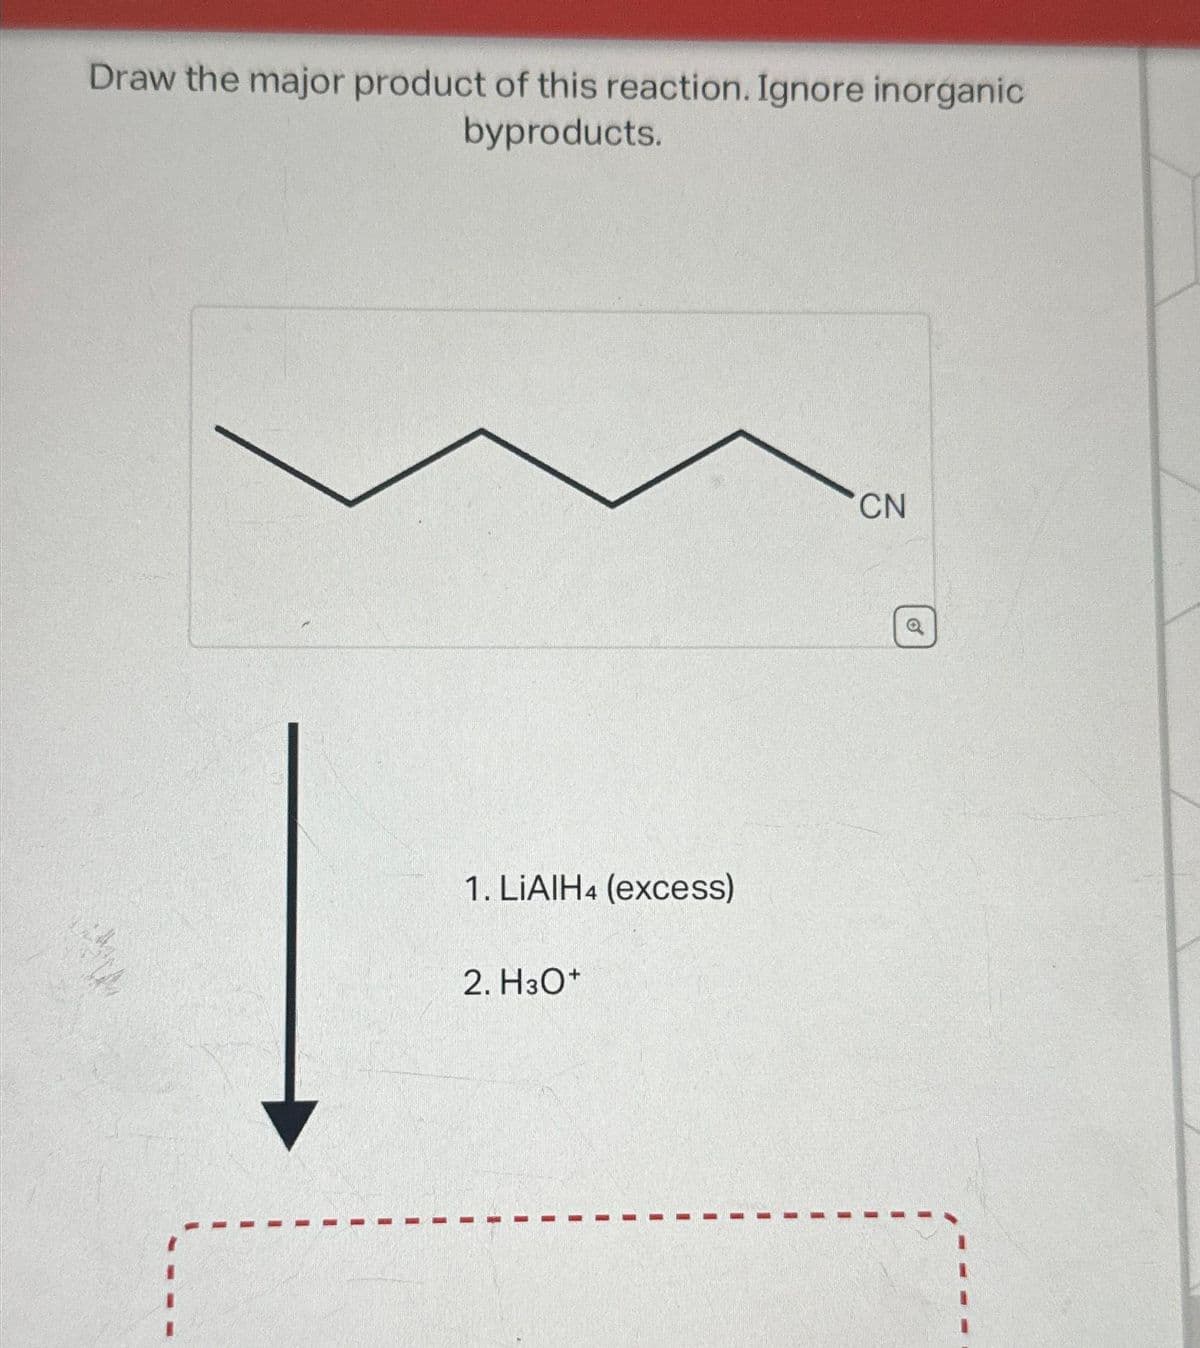 Draw the major product of this reaction. Ignore inorganic
byproducts.
1. LIAIH4 (excess)
2. H3O+
CN
o